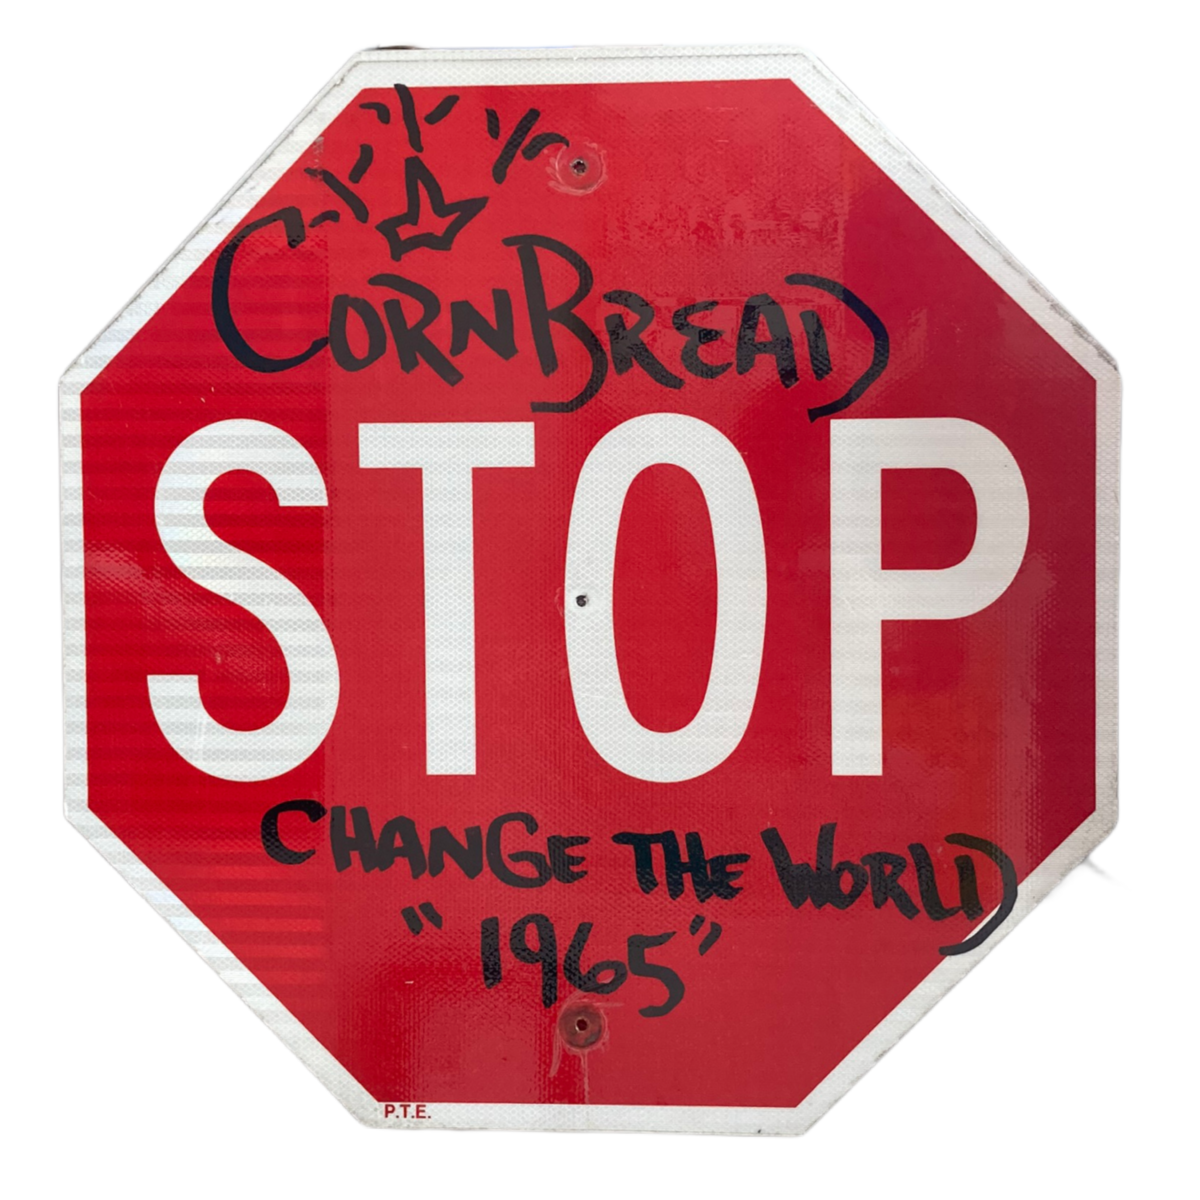 Change The World "1965" Stop Sign 1